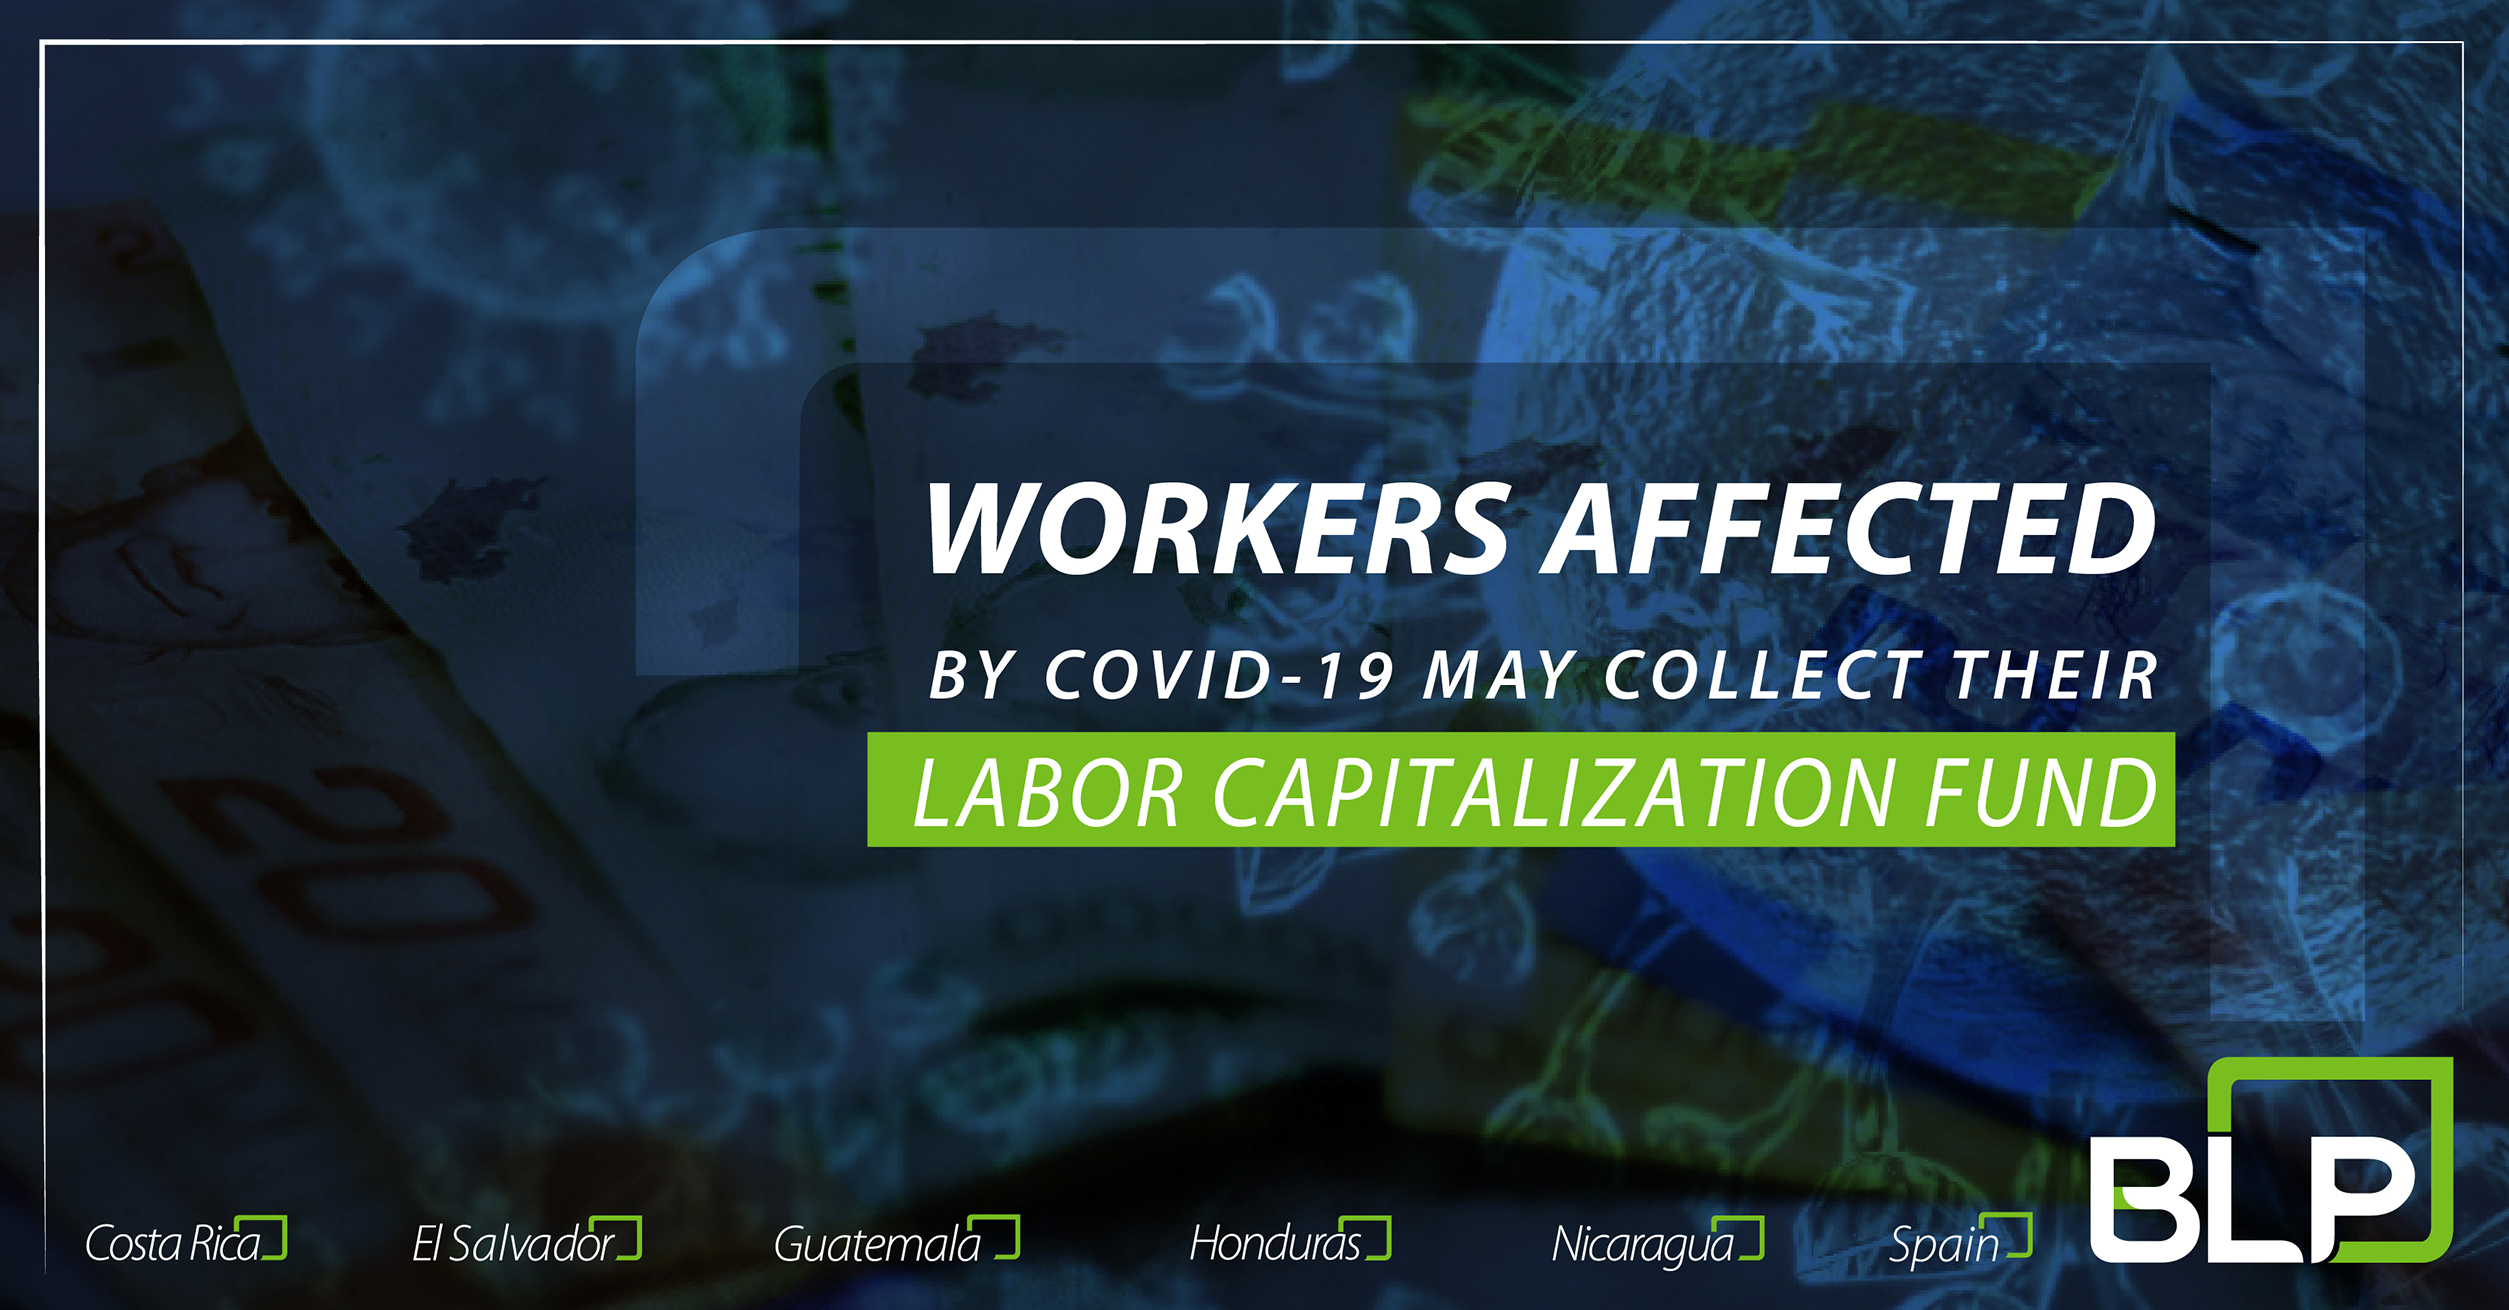 Workers affected by COVID-19 may collect their labor capitalization fund